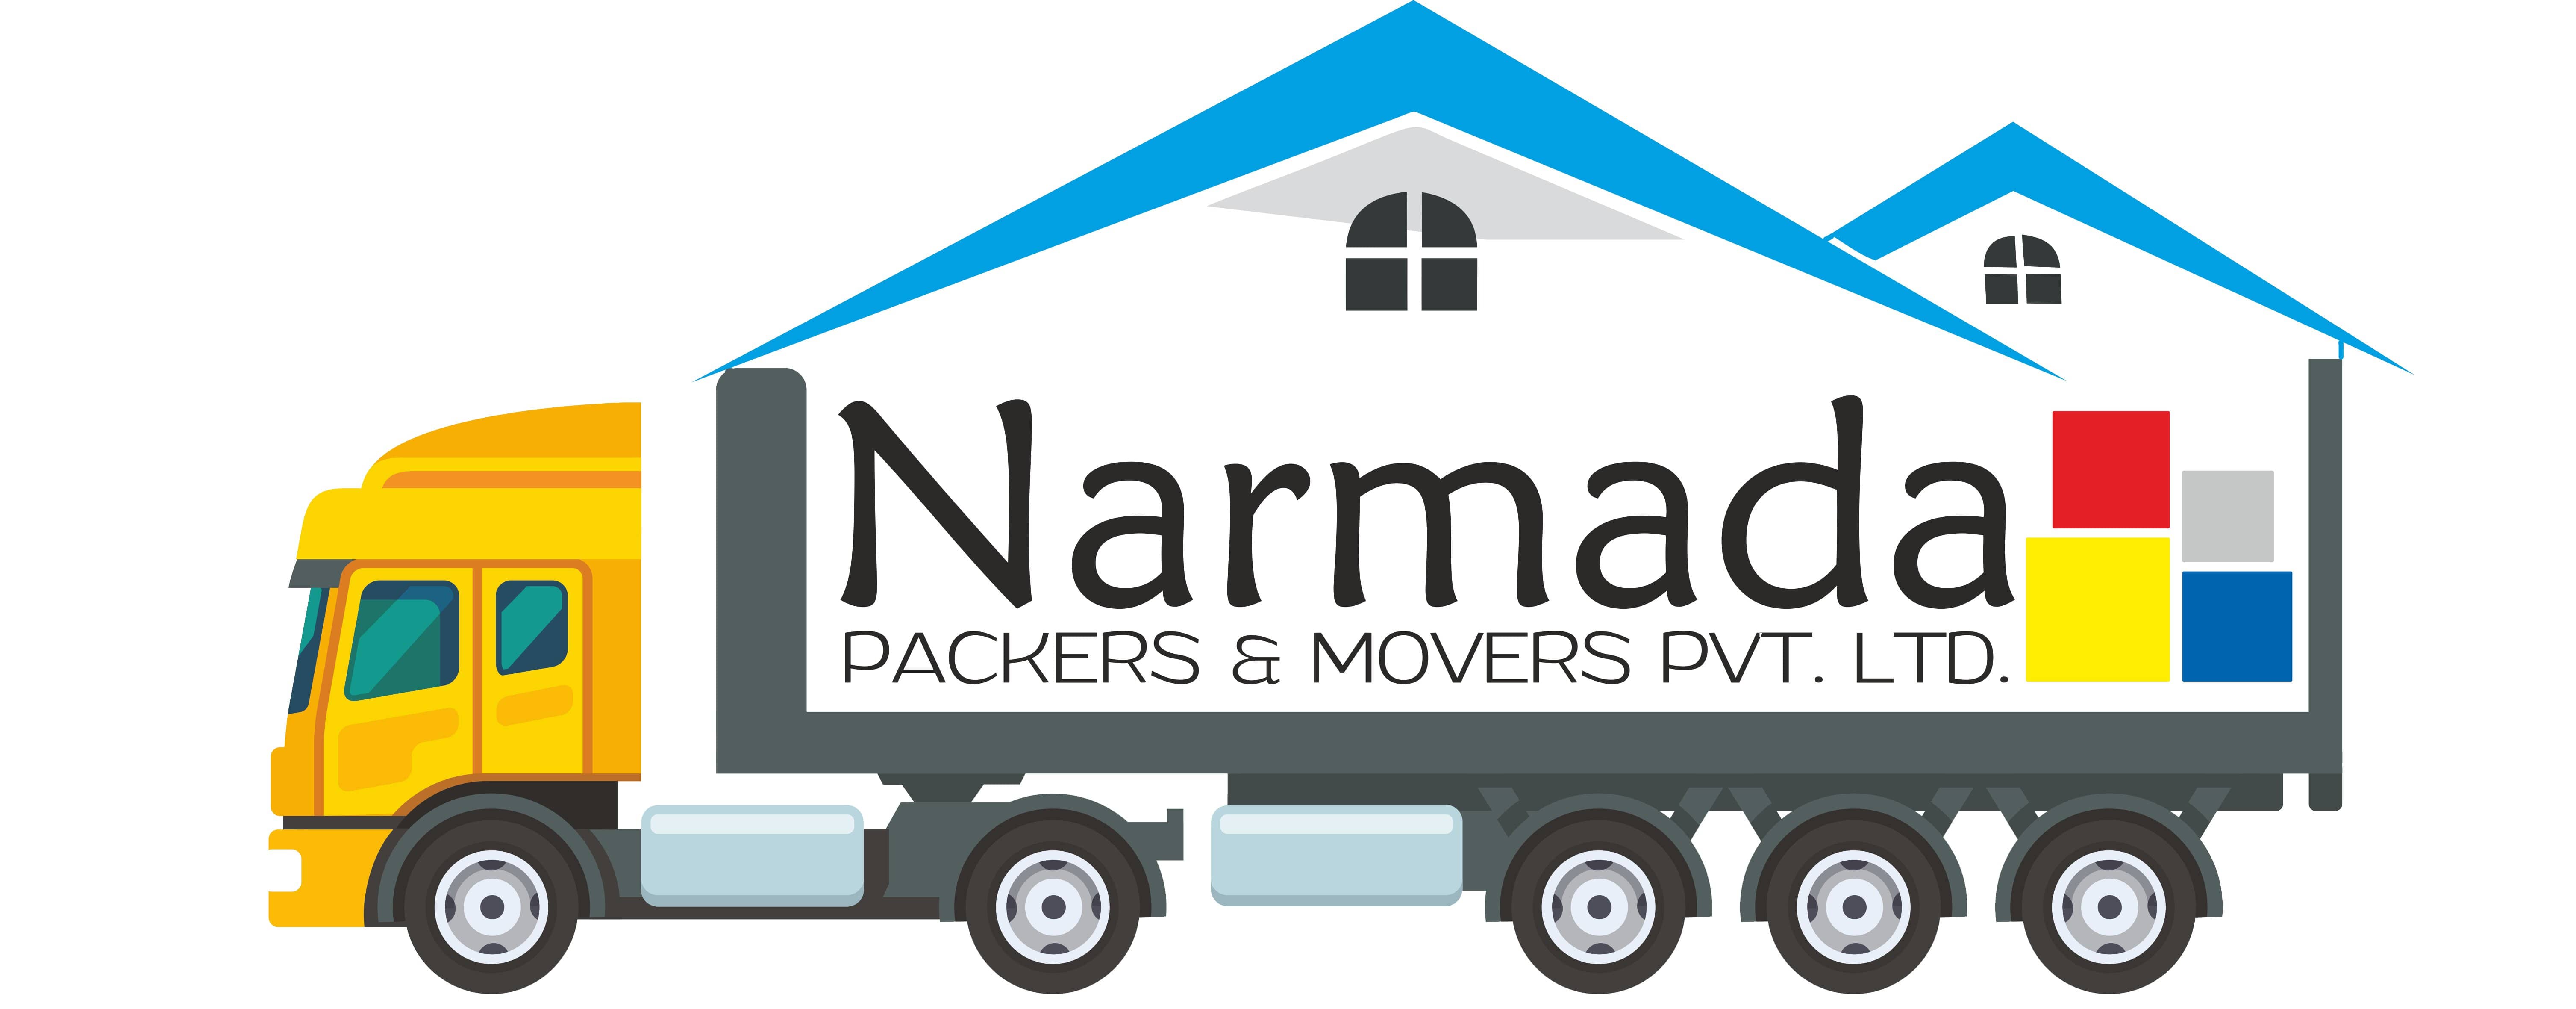 Packers And Movers in IndoreServicesMovers & PackersAll Indiaother